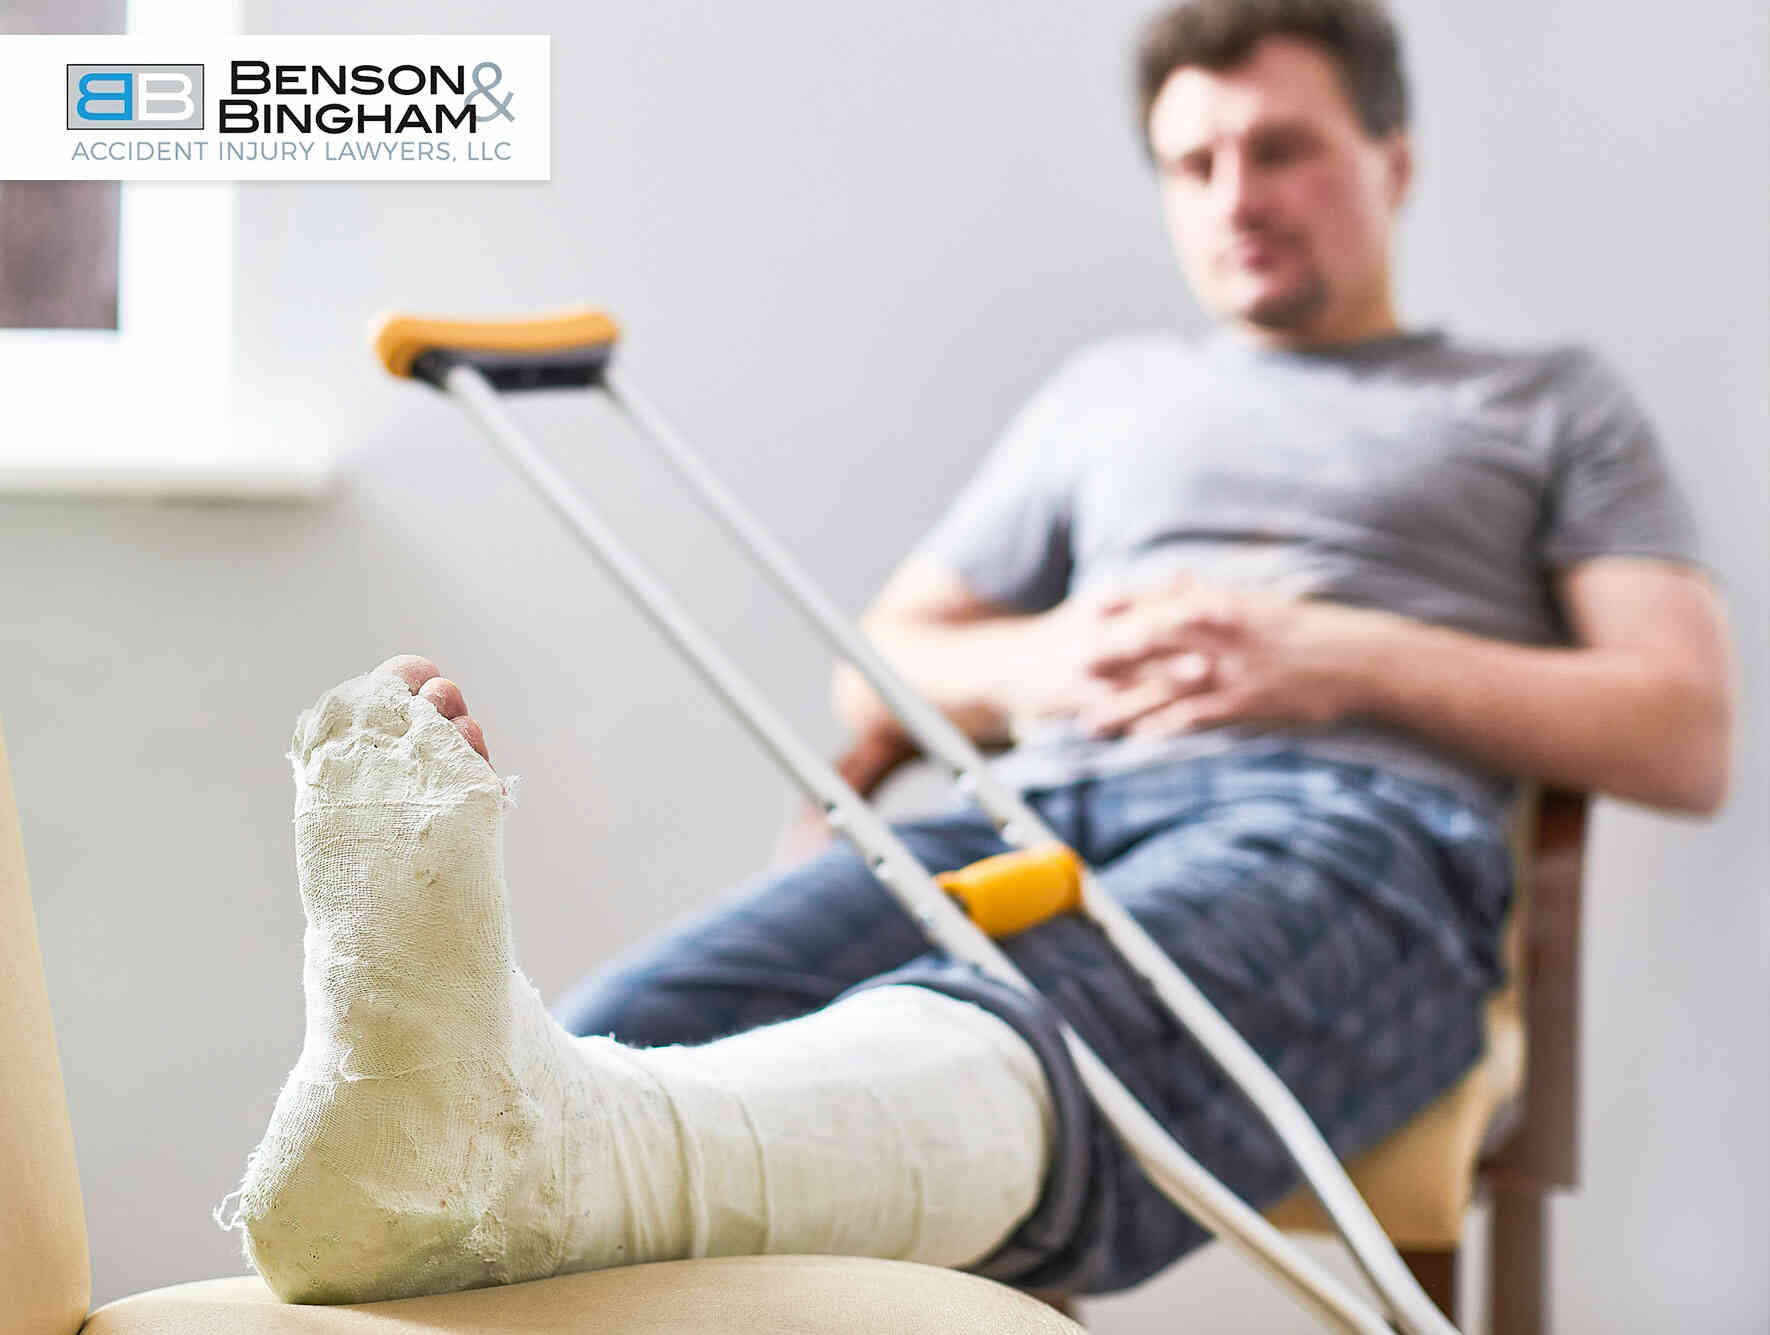 slip-and-fall-injuries-lawyers-in-west-las-vegas - Photos of Our Business -  Benson & Bingham Accident Injury Lawyers,